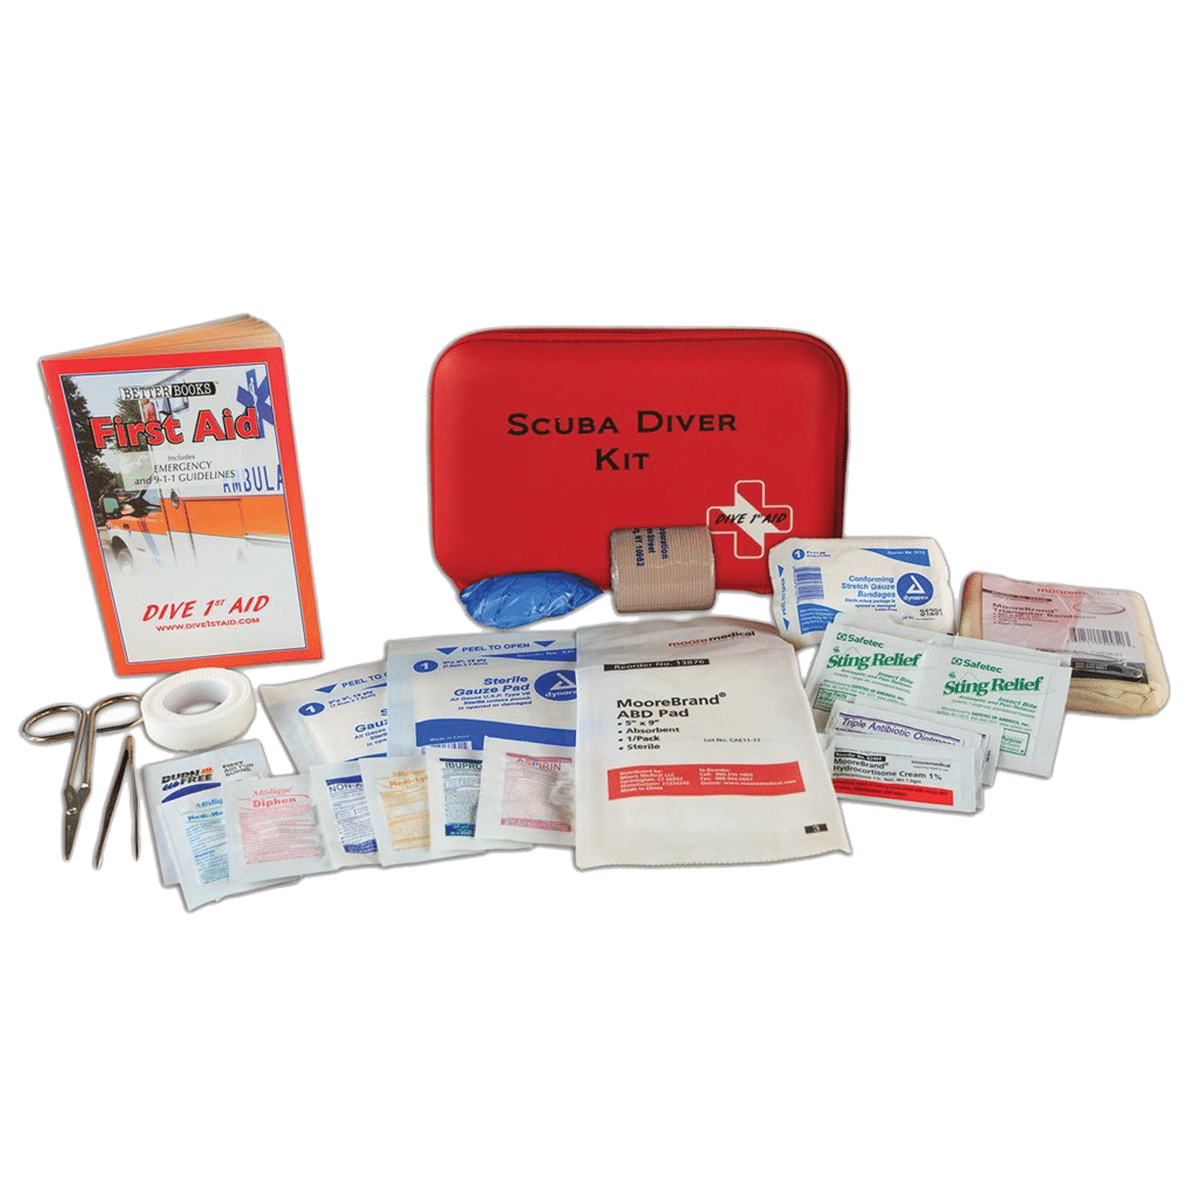 I. Introduction to Diving First Aid